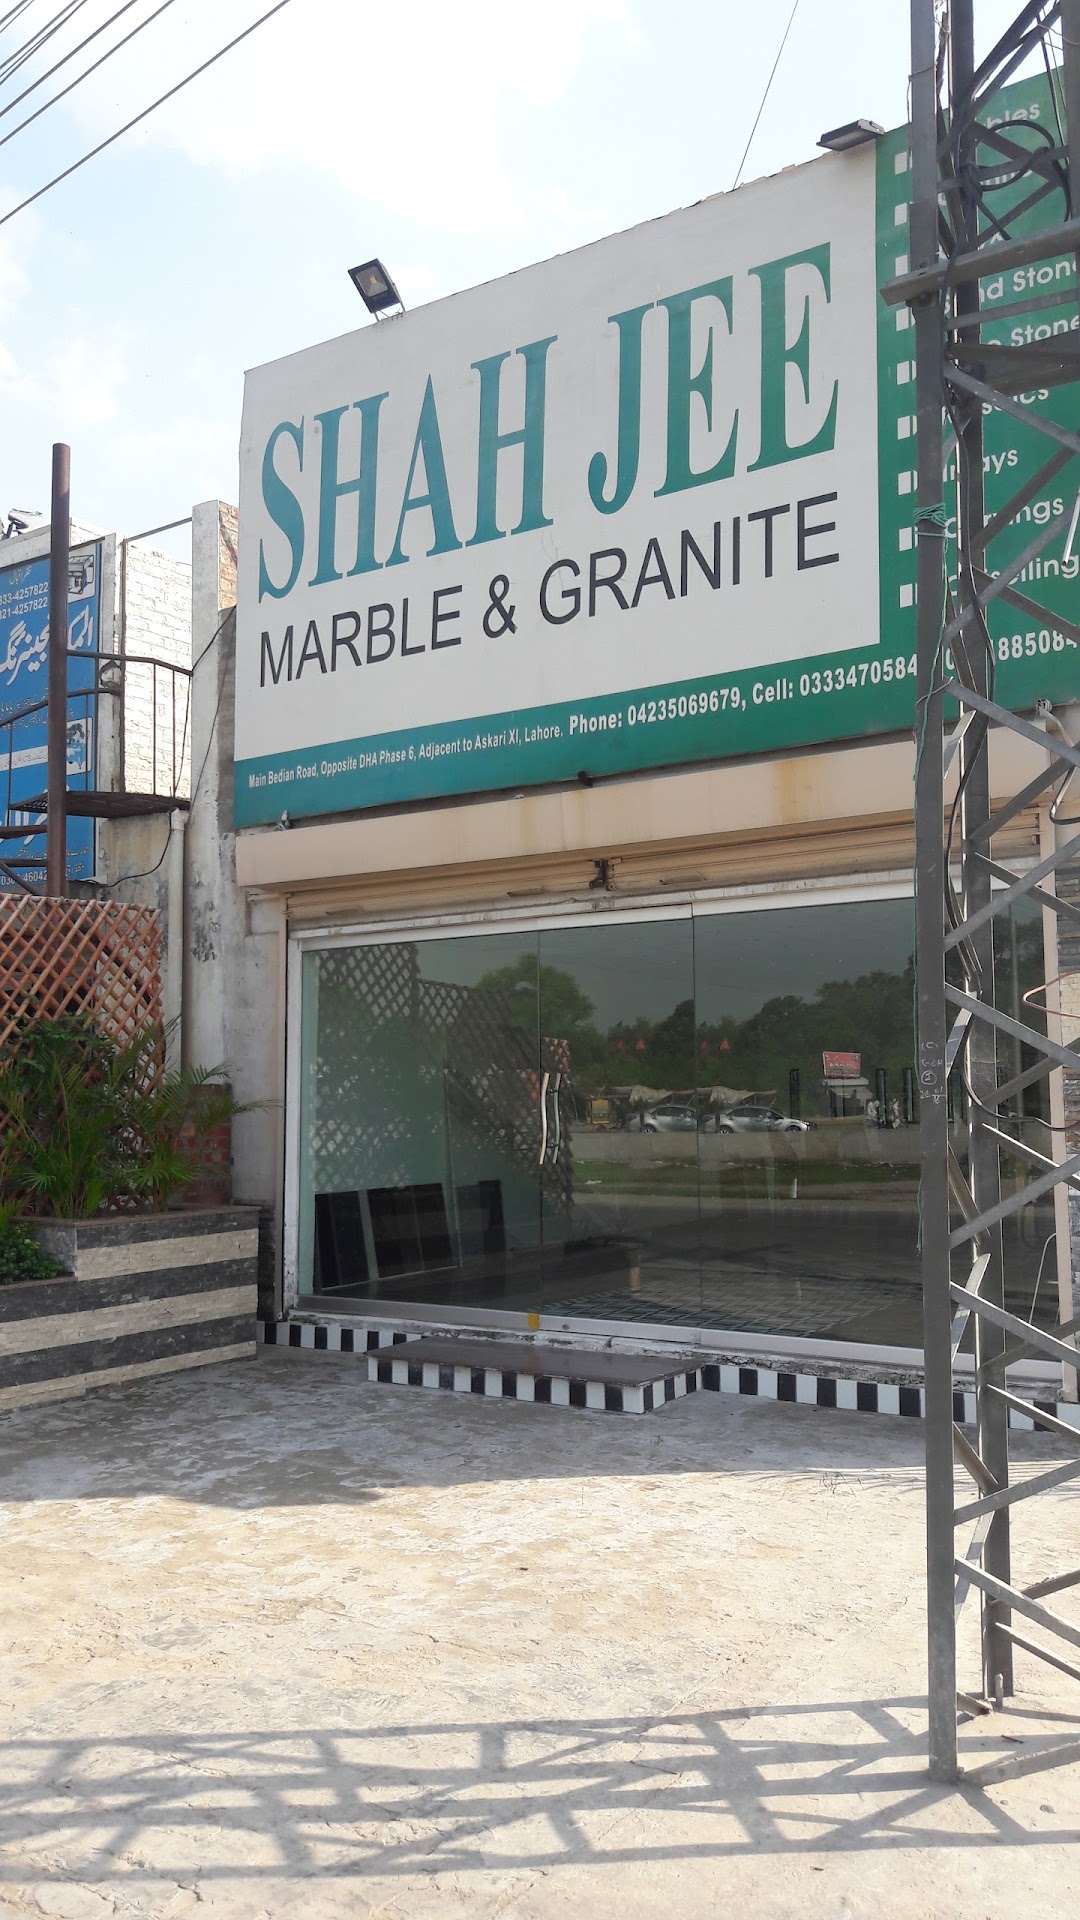 ShahJee Marbles & Granite- Luxury Marble boutique